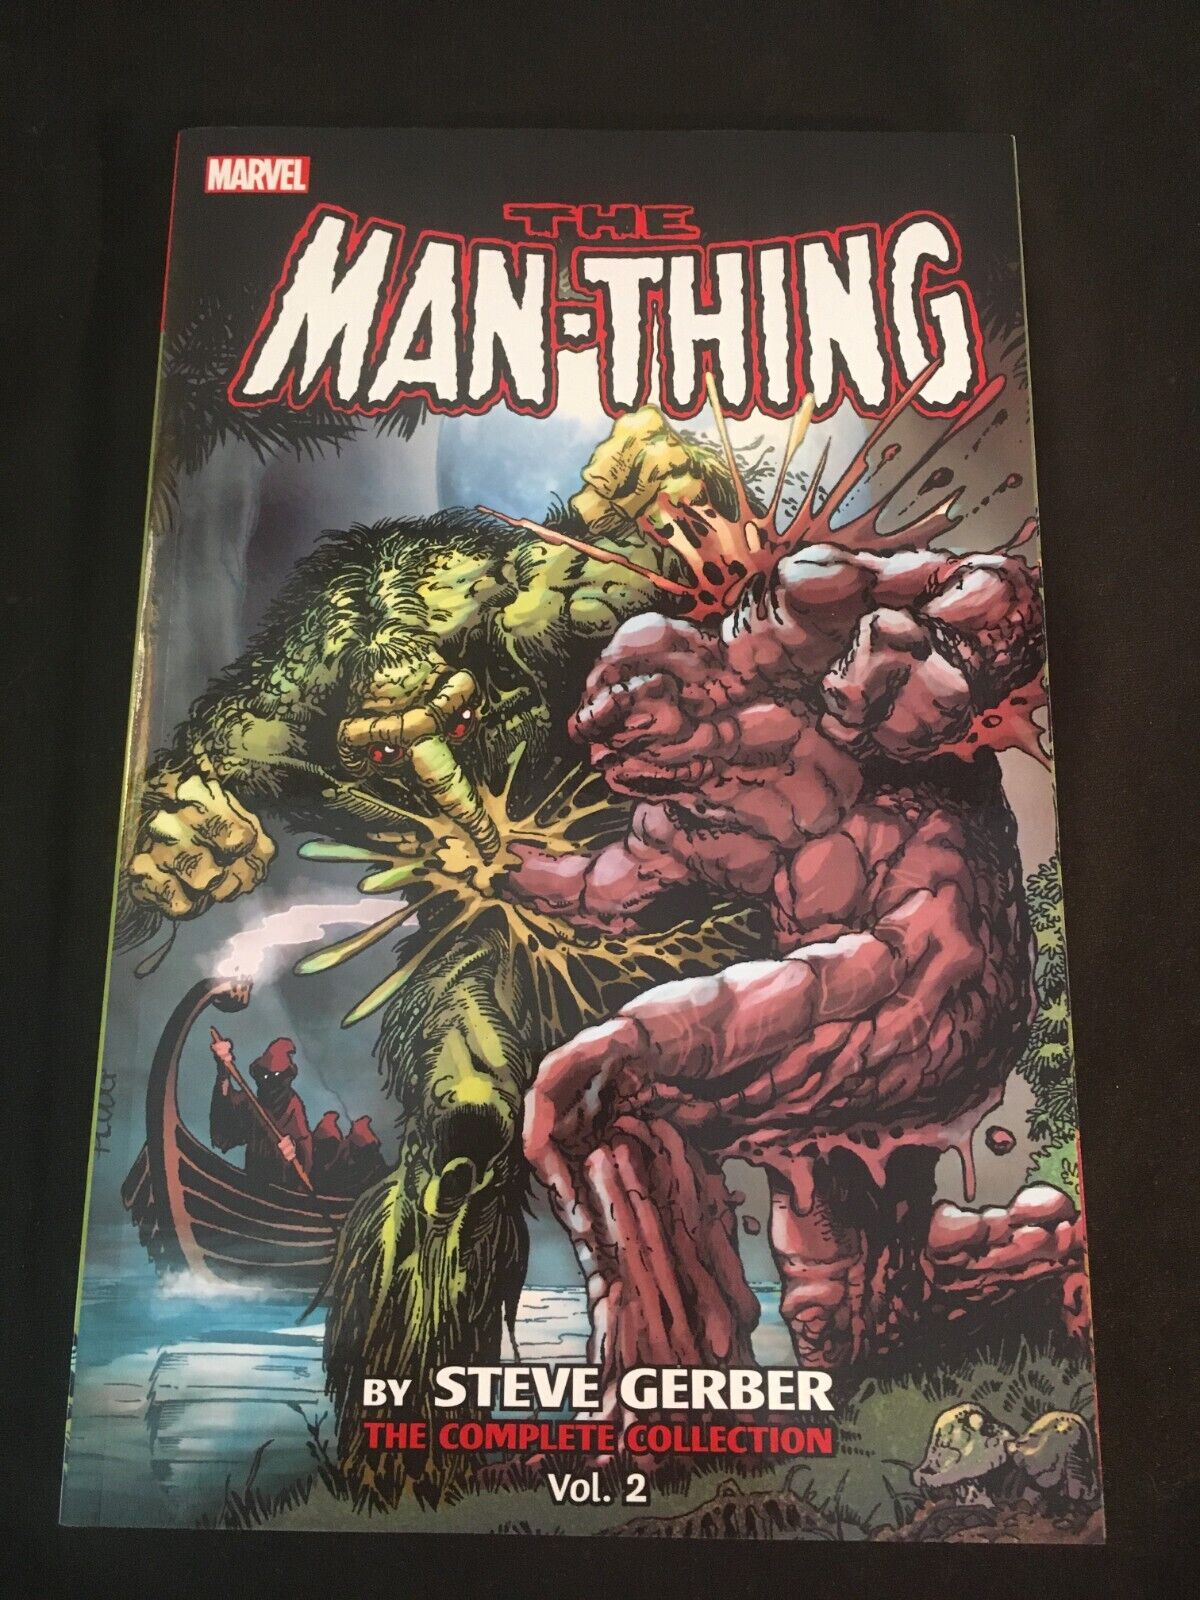 THE MAN-THING BY STEVE GERBER: THE COMPLETE COLLECTION Vol. 2, Trade Paperback